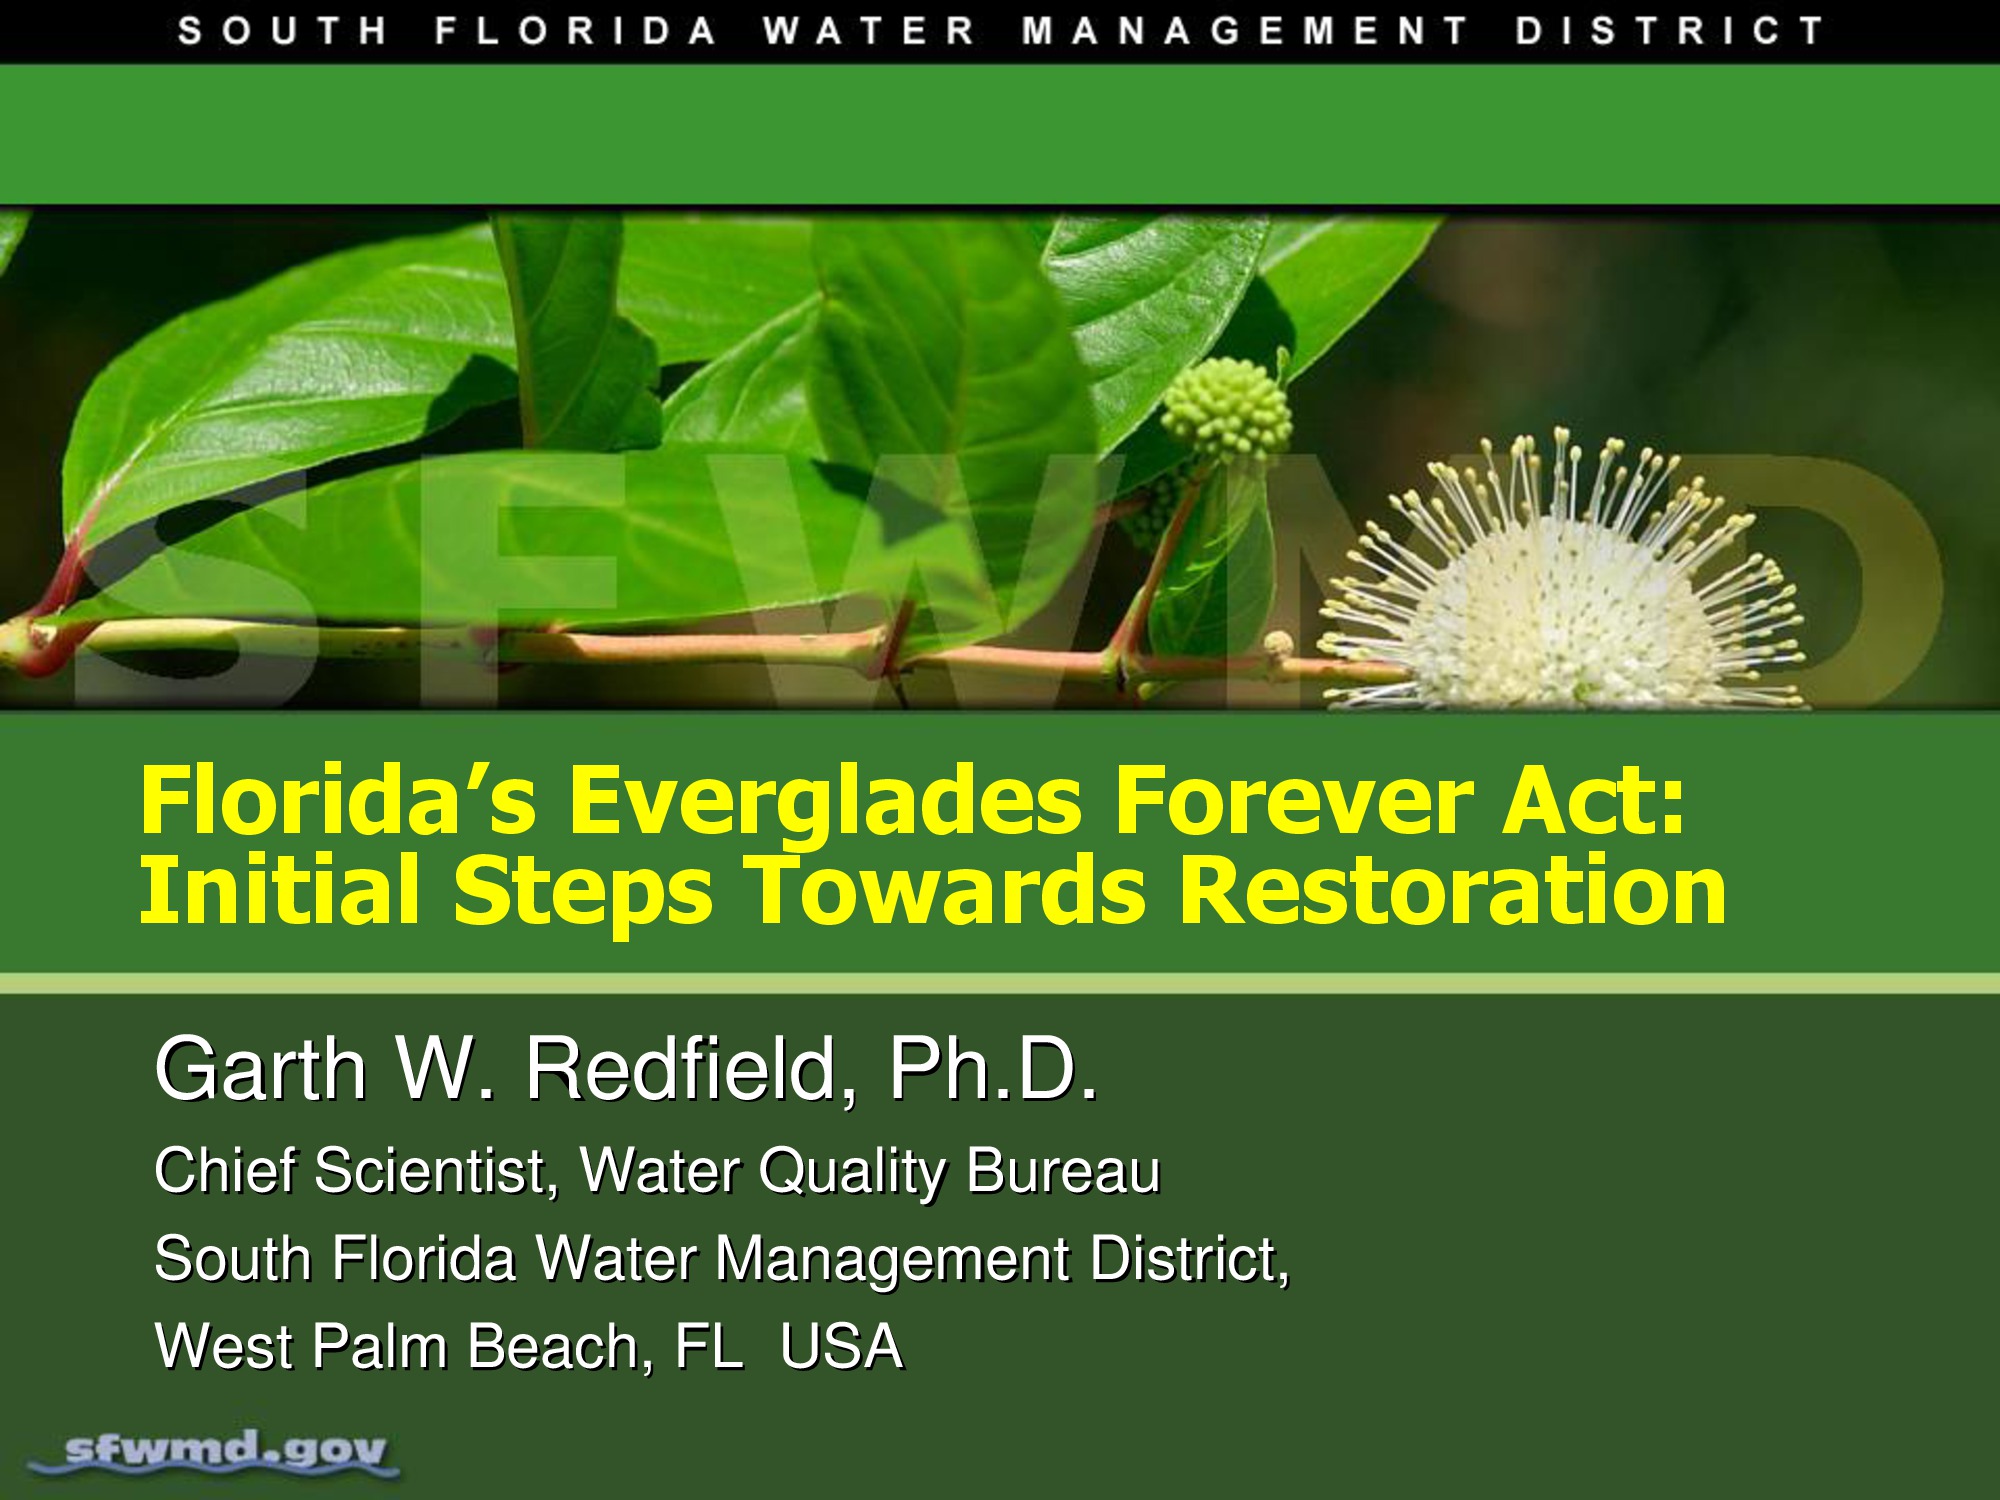 Lecture 2.2 Everglades Forever Act, Water Quality & STA's